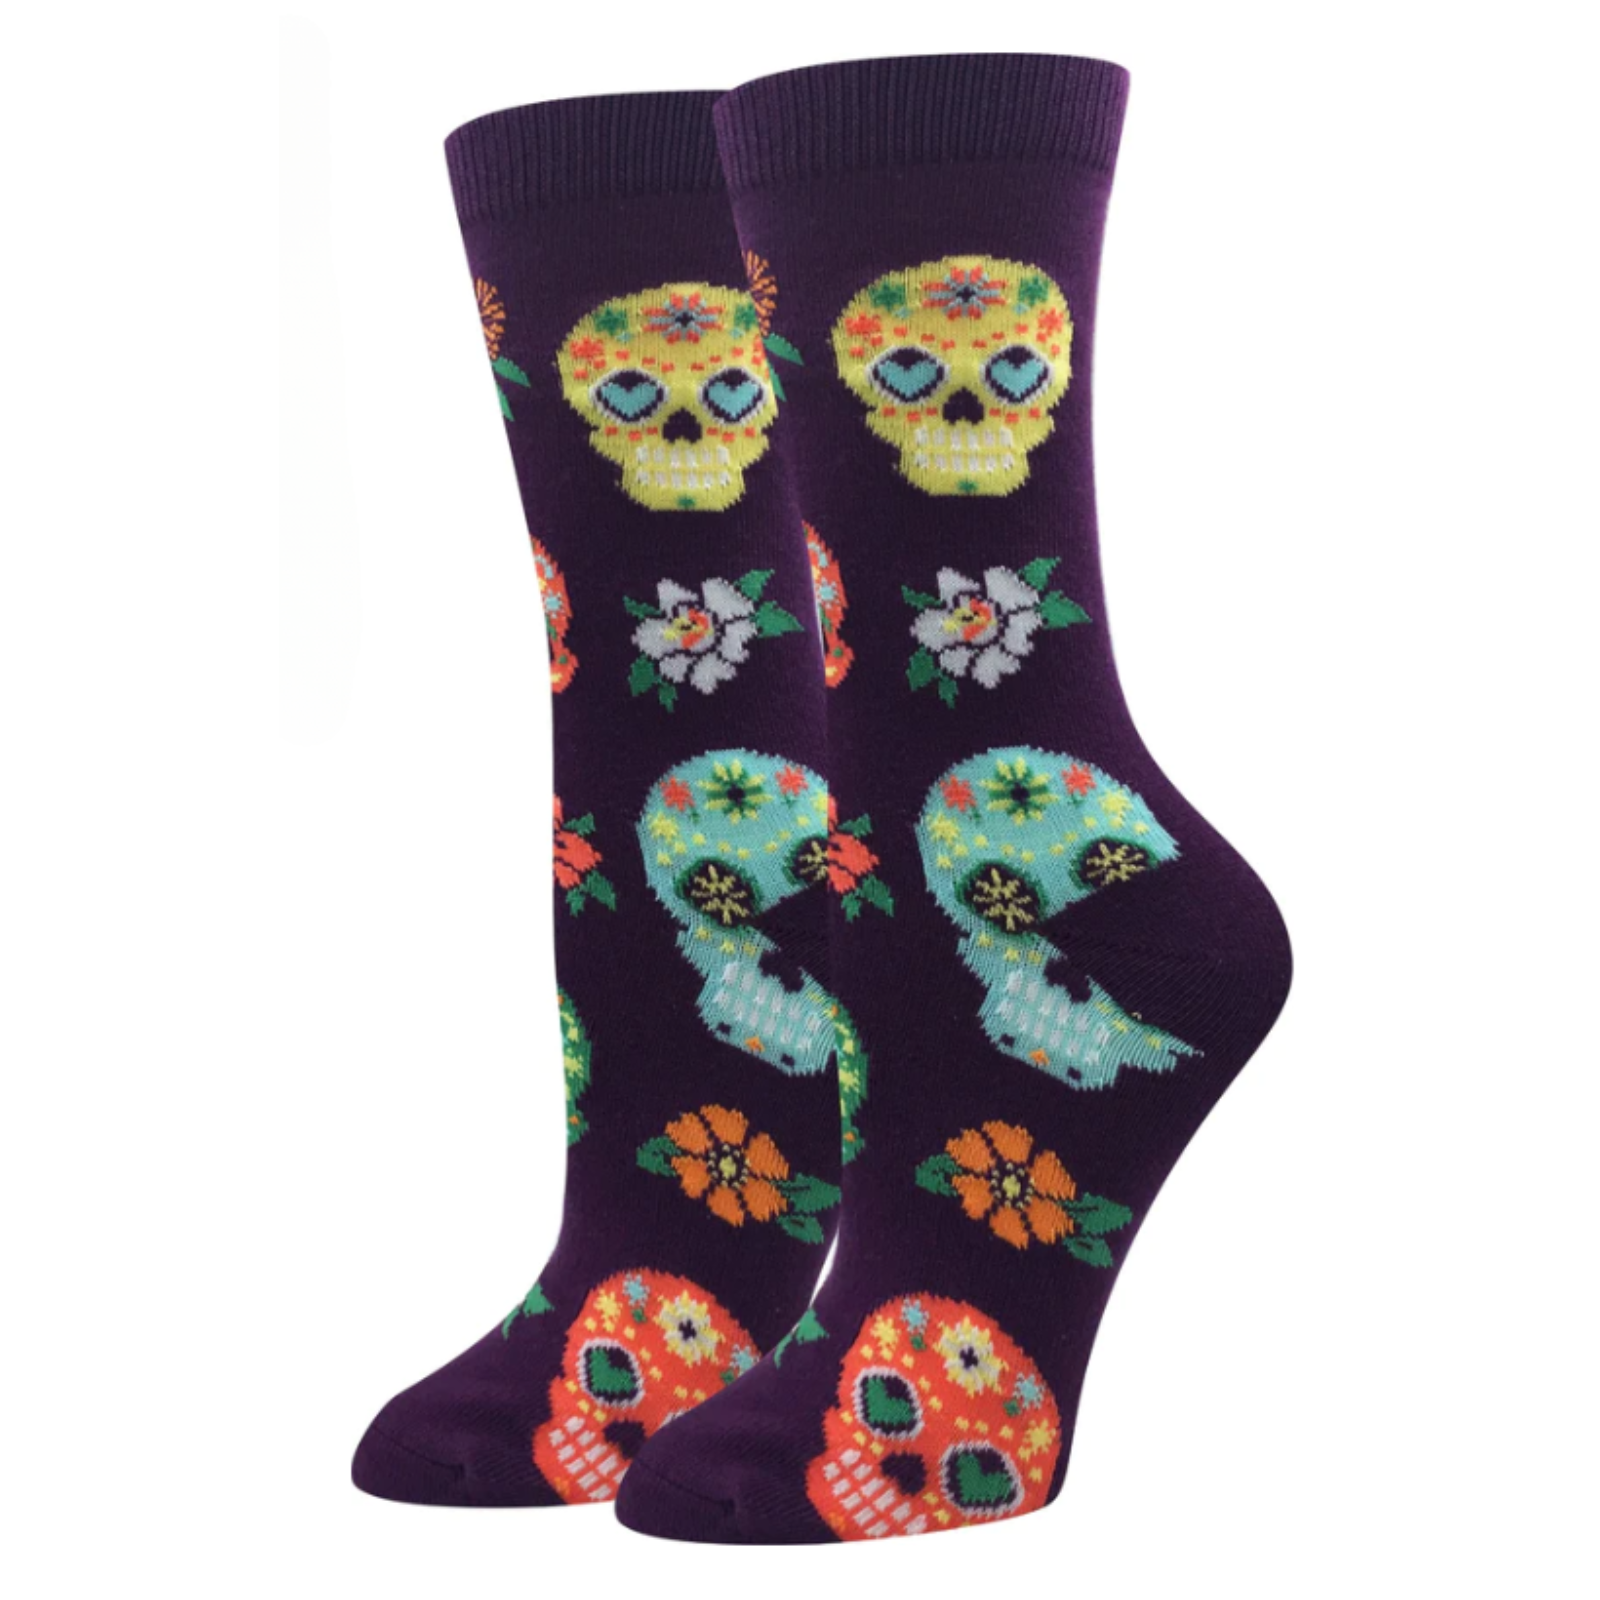 Sock Harbor Calaveras women's crew sock featuring purple sock with orange, yellow, and teal Sugar Skulls for the Day of the Dead. Socks shown on display feet from the side. 